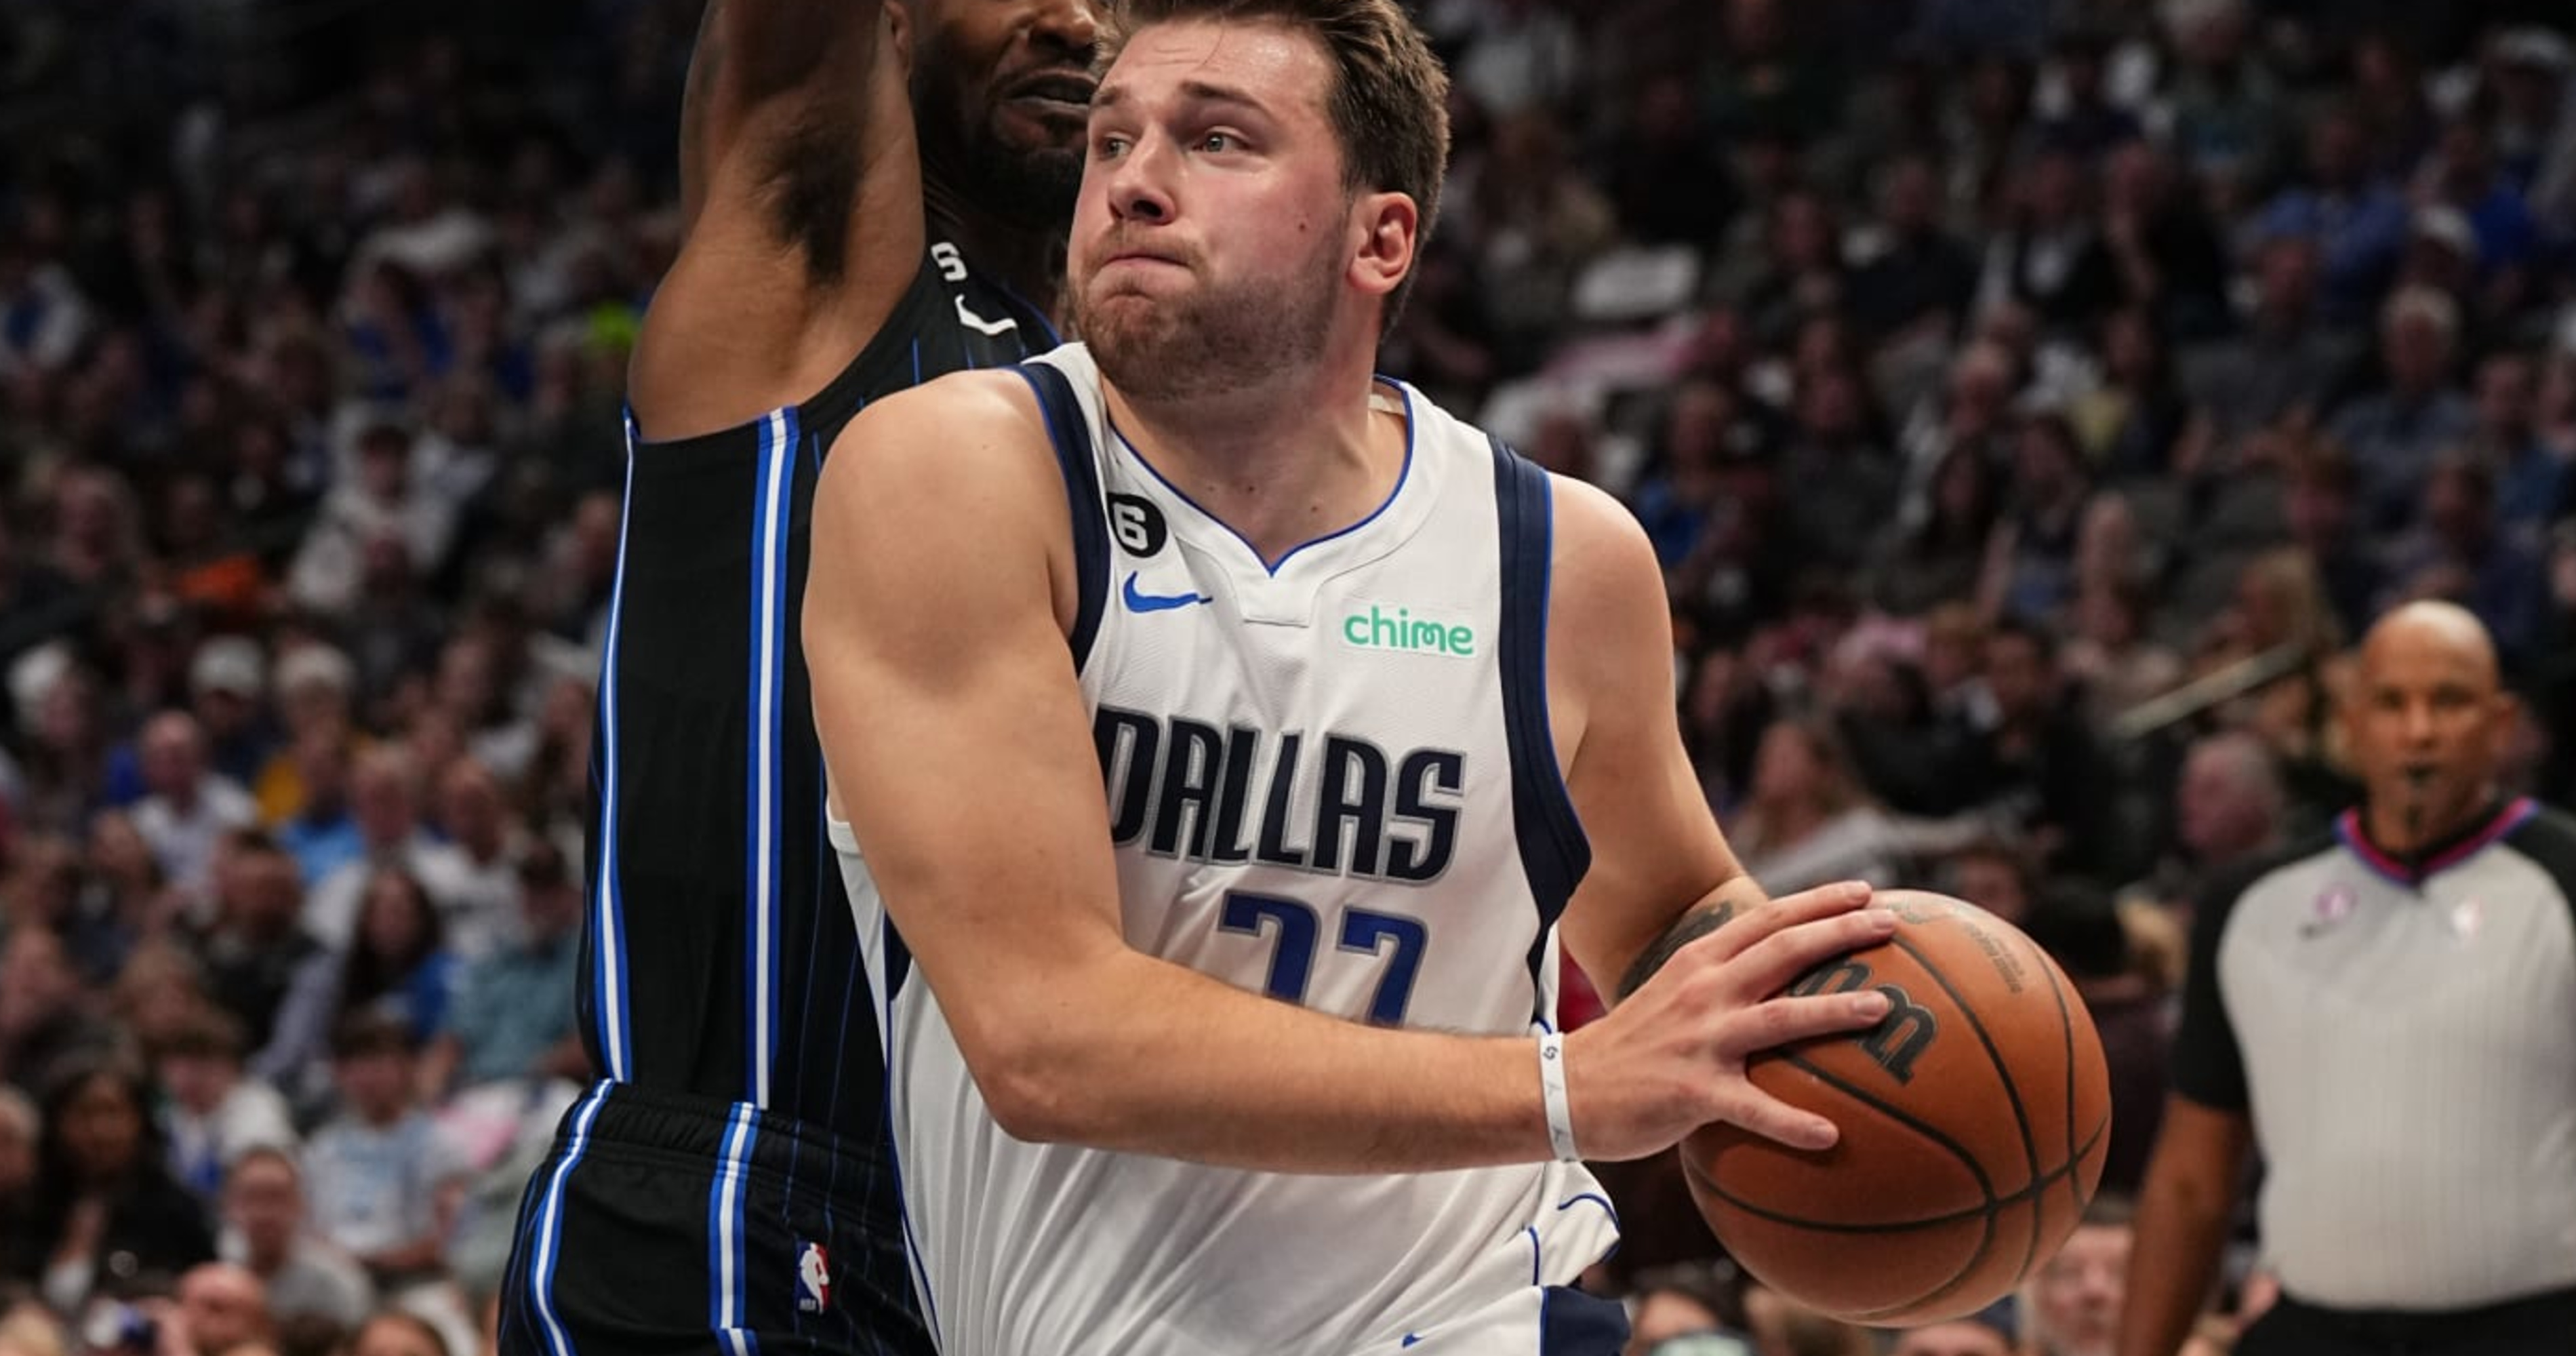 Top 5 stats that show Dallas Mavericks' Luka Doncic could be the next NBA  superstar